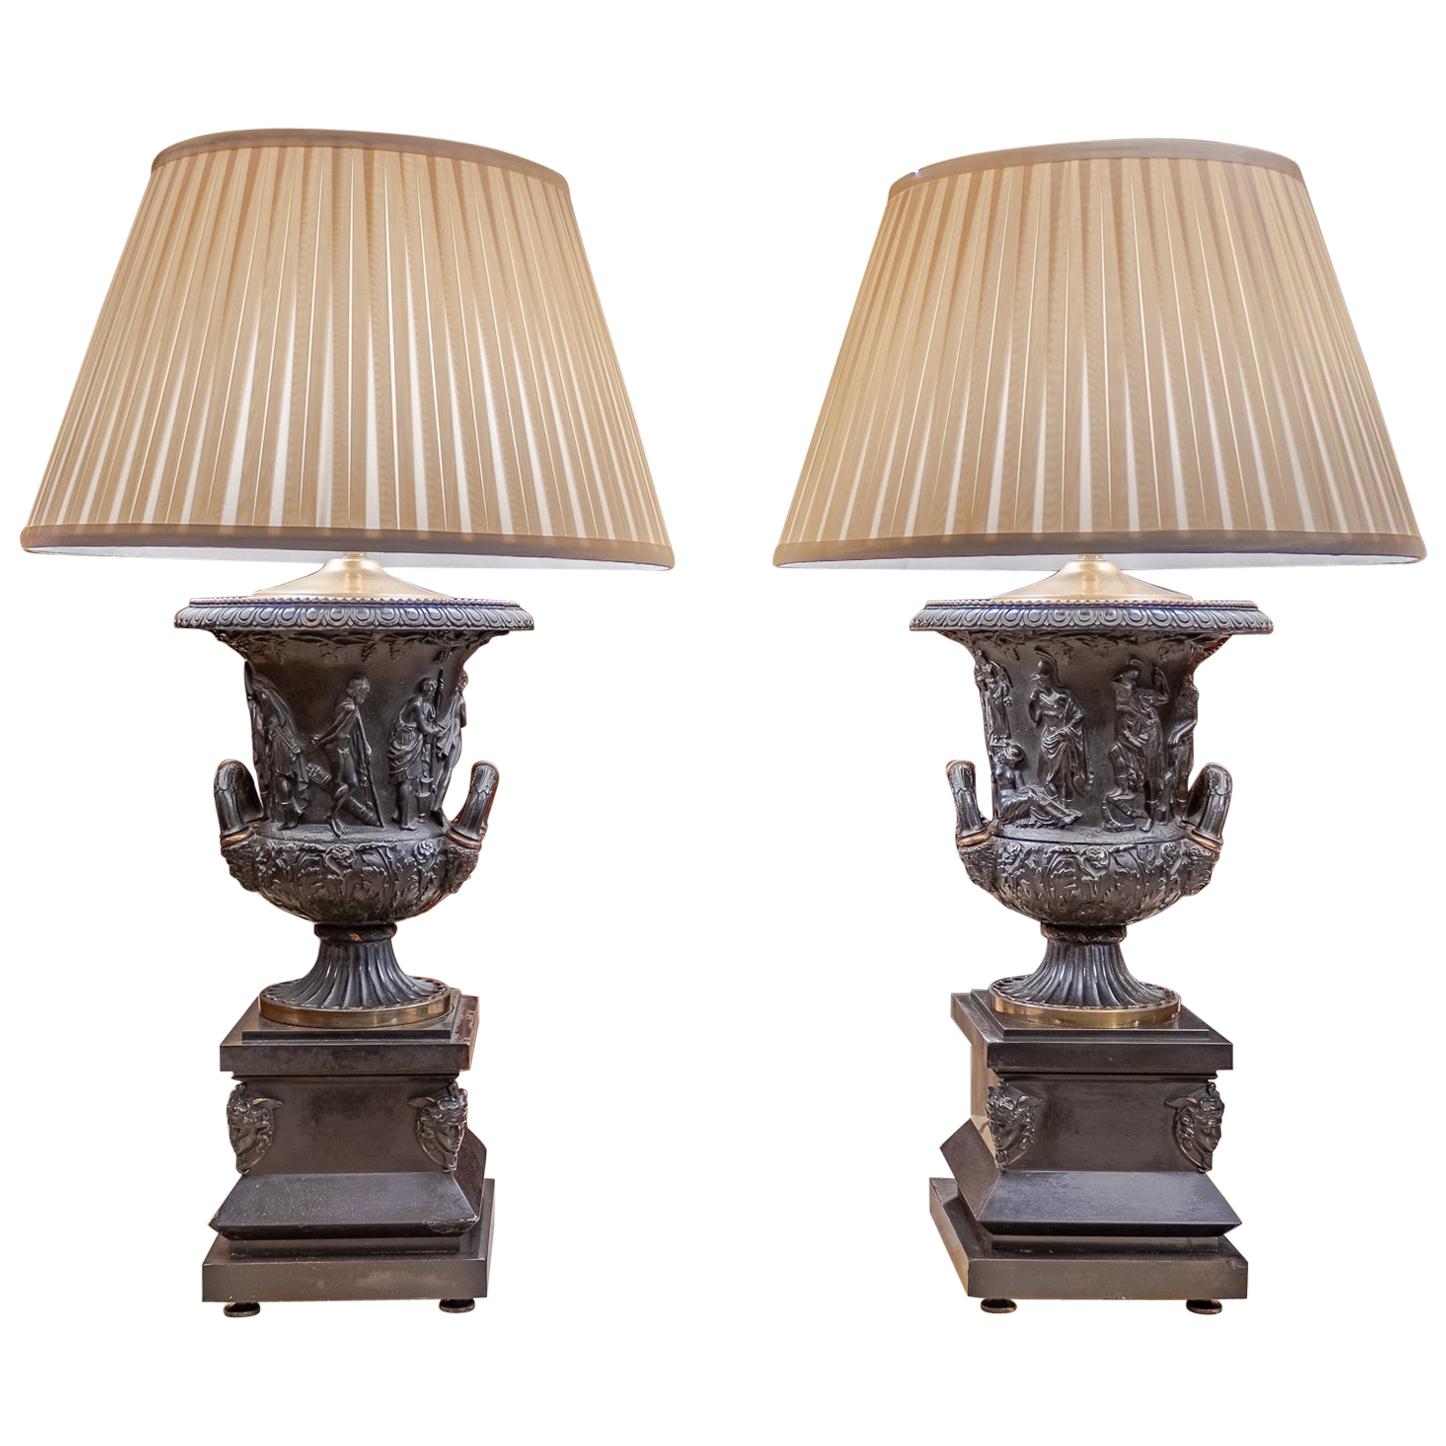 19th Century French Neoclassical Patinated Bronze Urn Lamps after Barbedienne